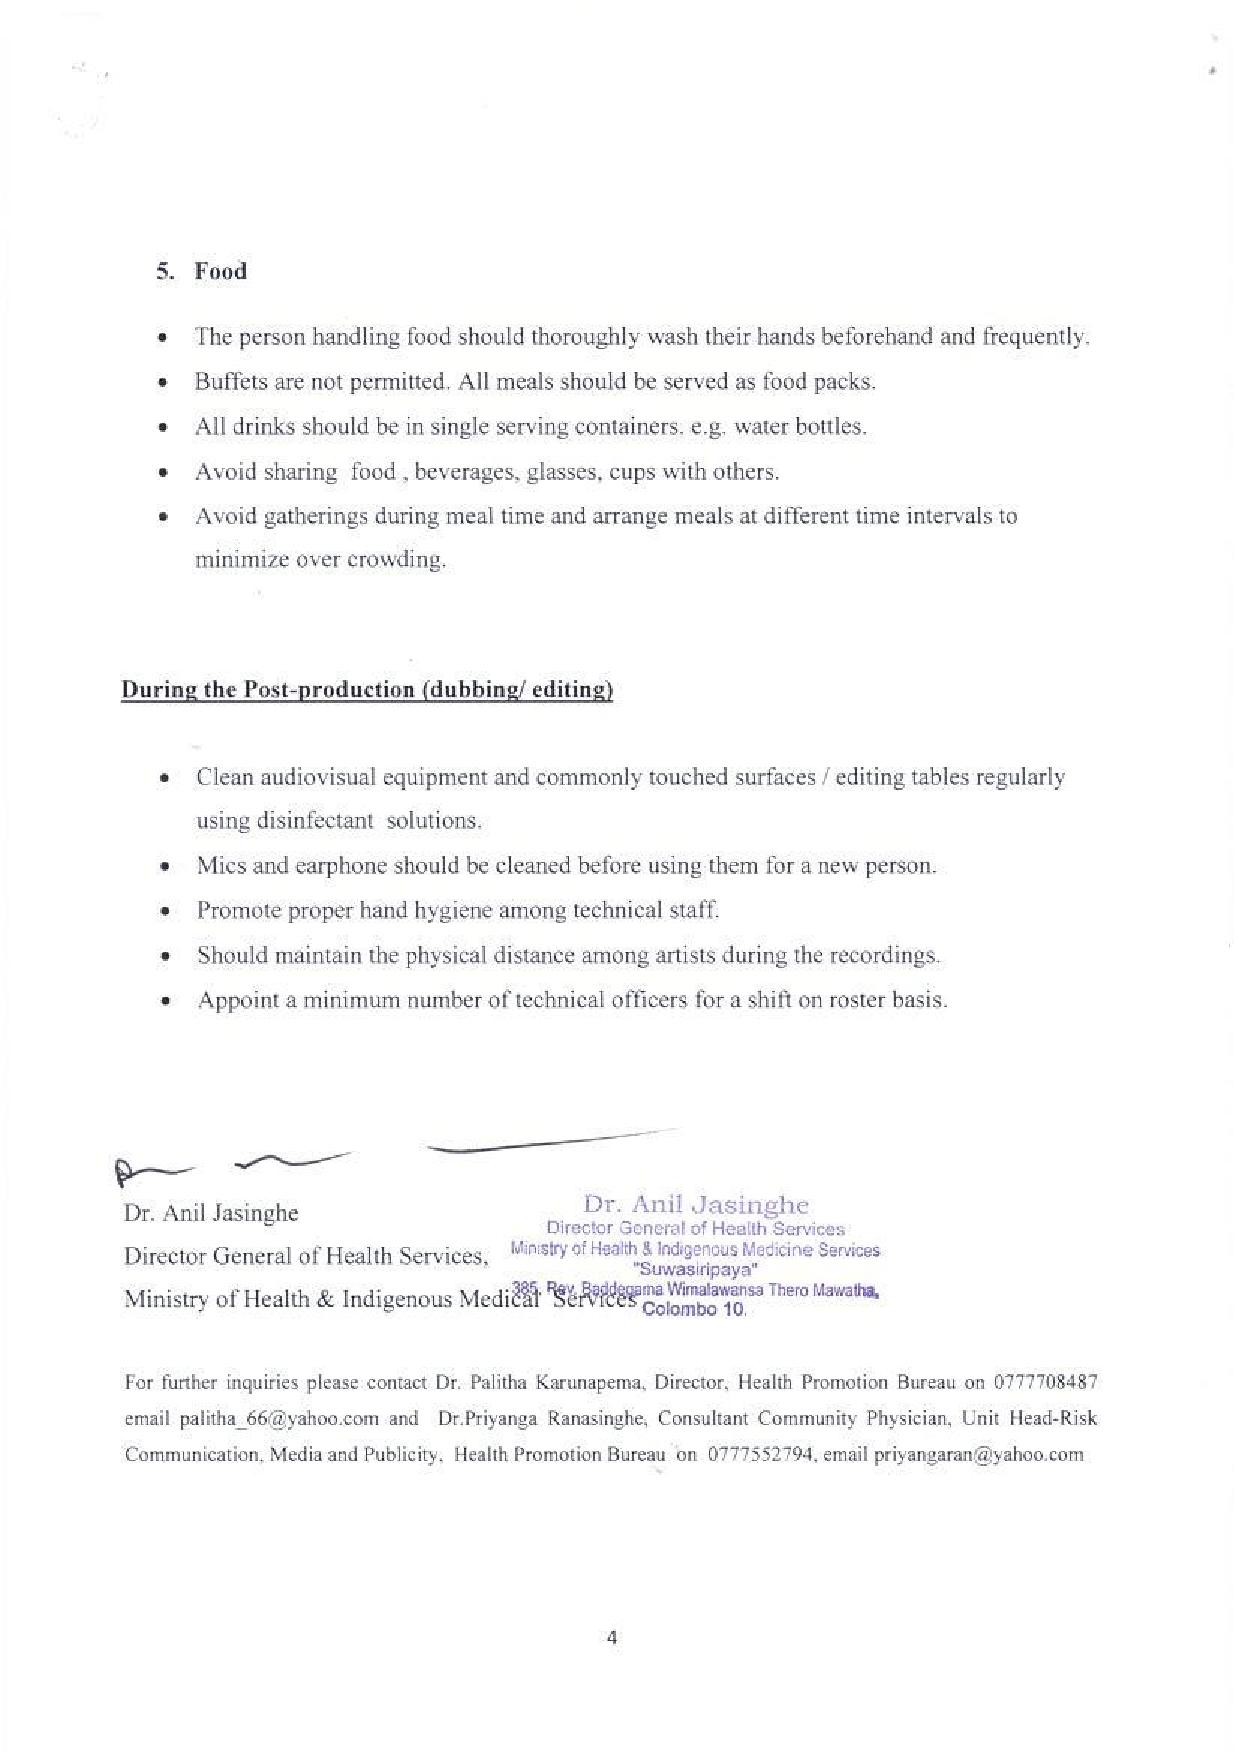 Guideline for Film and Teledrama Industry page 006